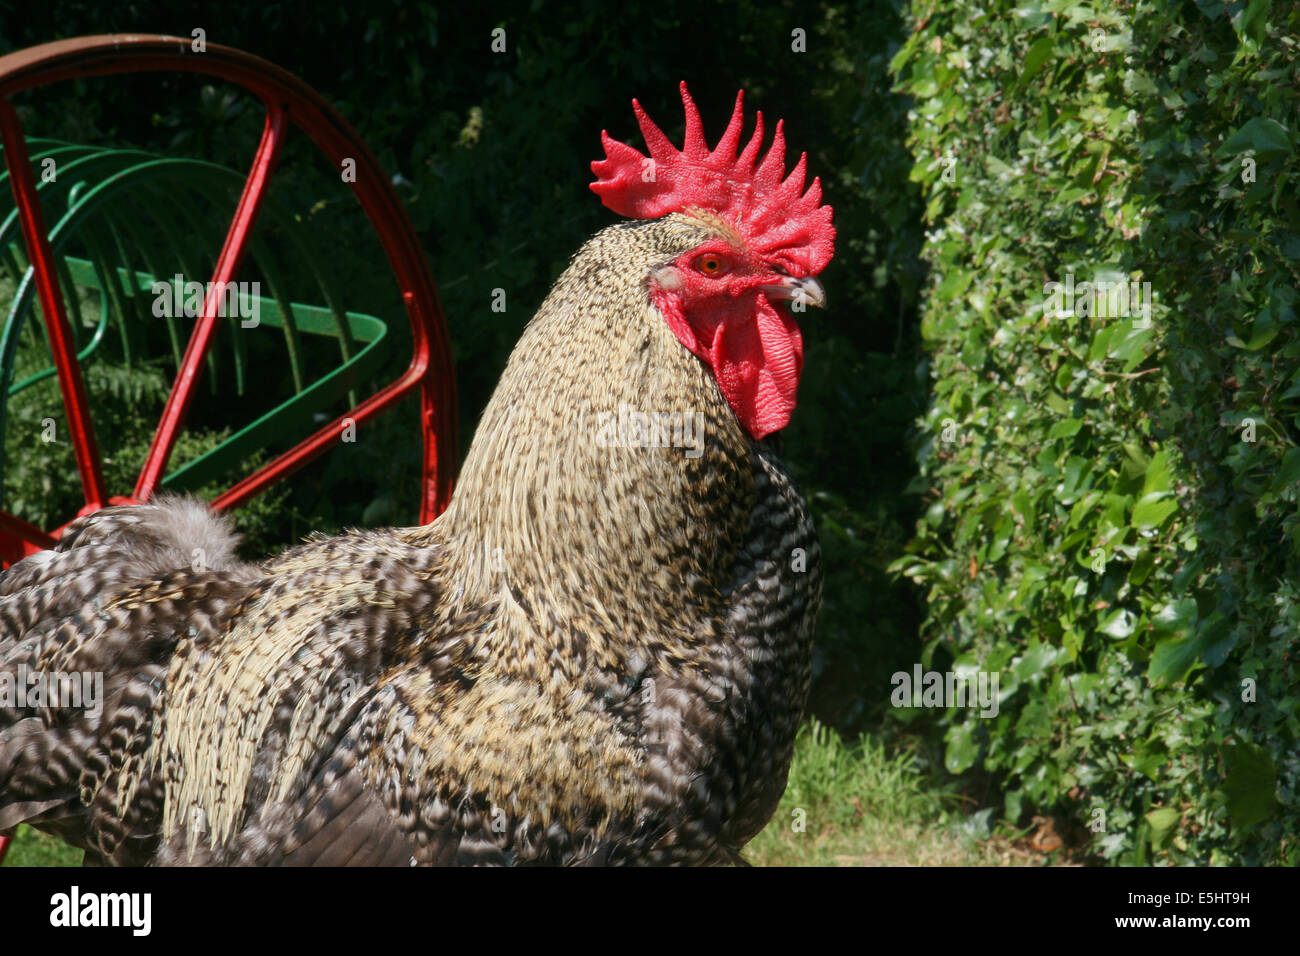 Farmyard rooster at Ulster Folk Museum, Belfast, Northern Ireland with farm machinery Stock Photo